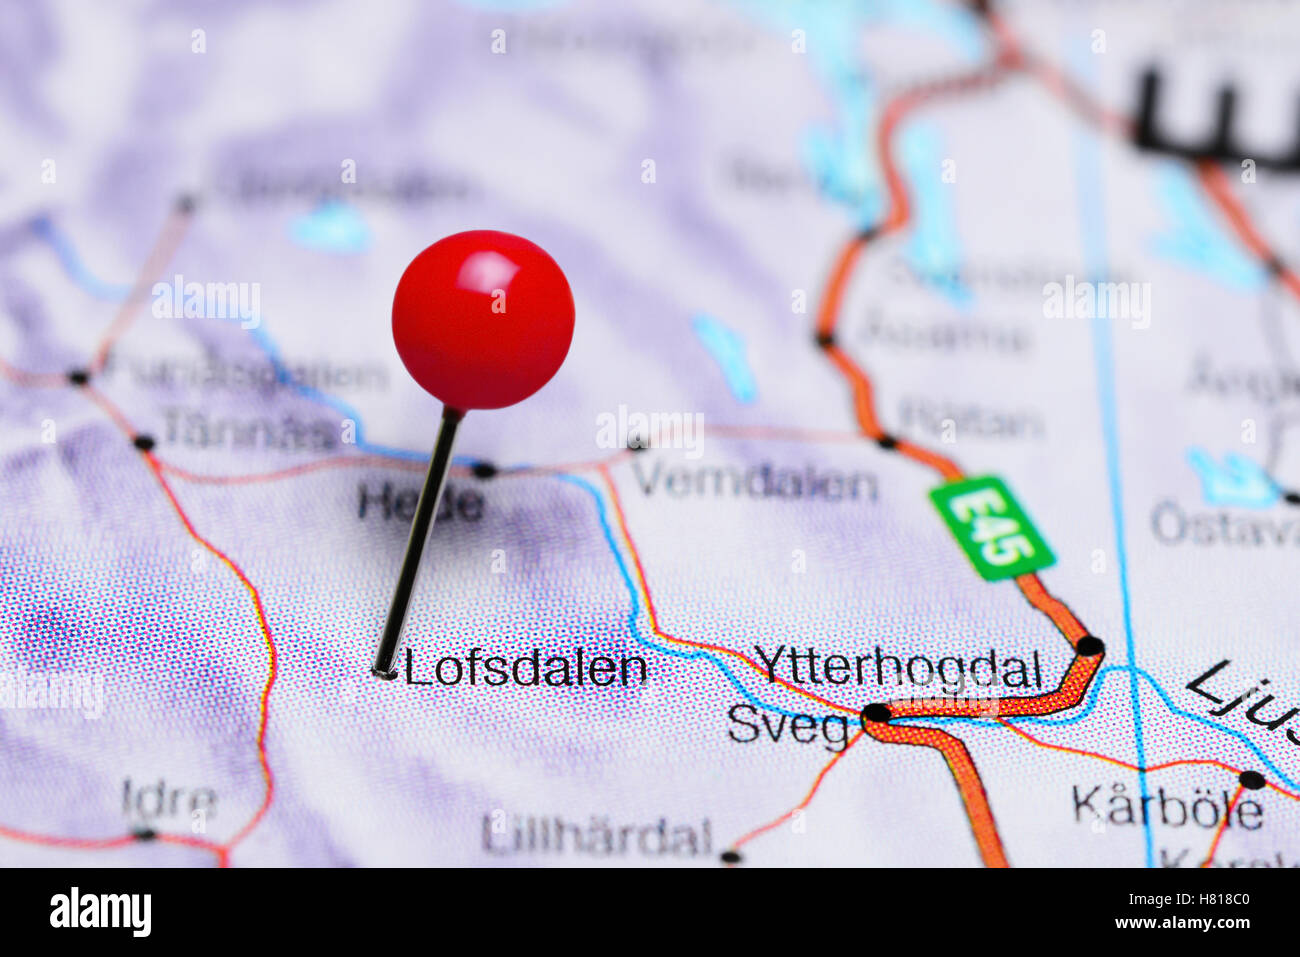 Lofsdalen pinned on a map of Sweden Stock Photo